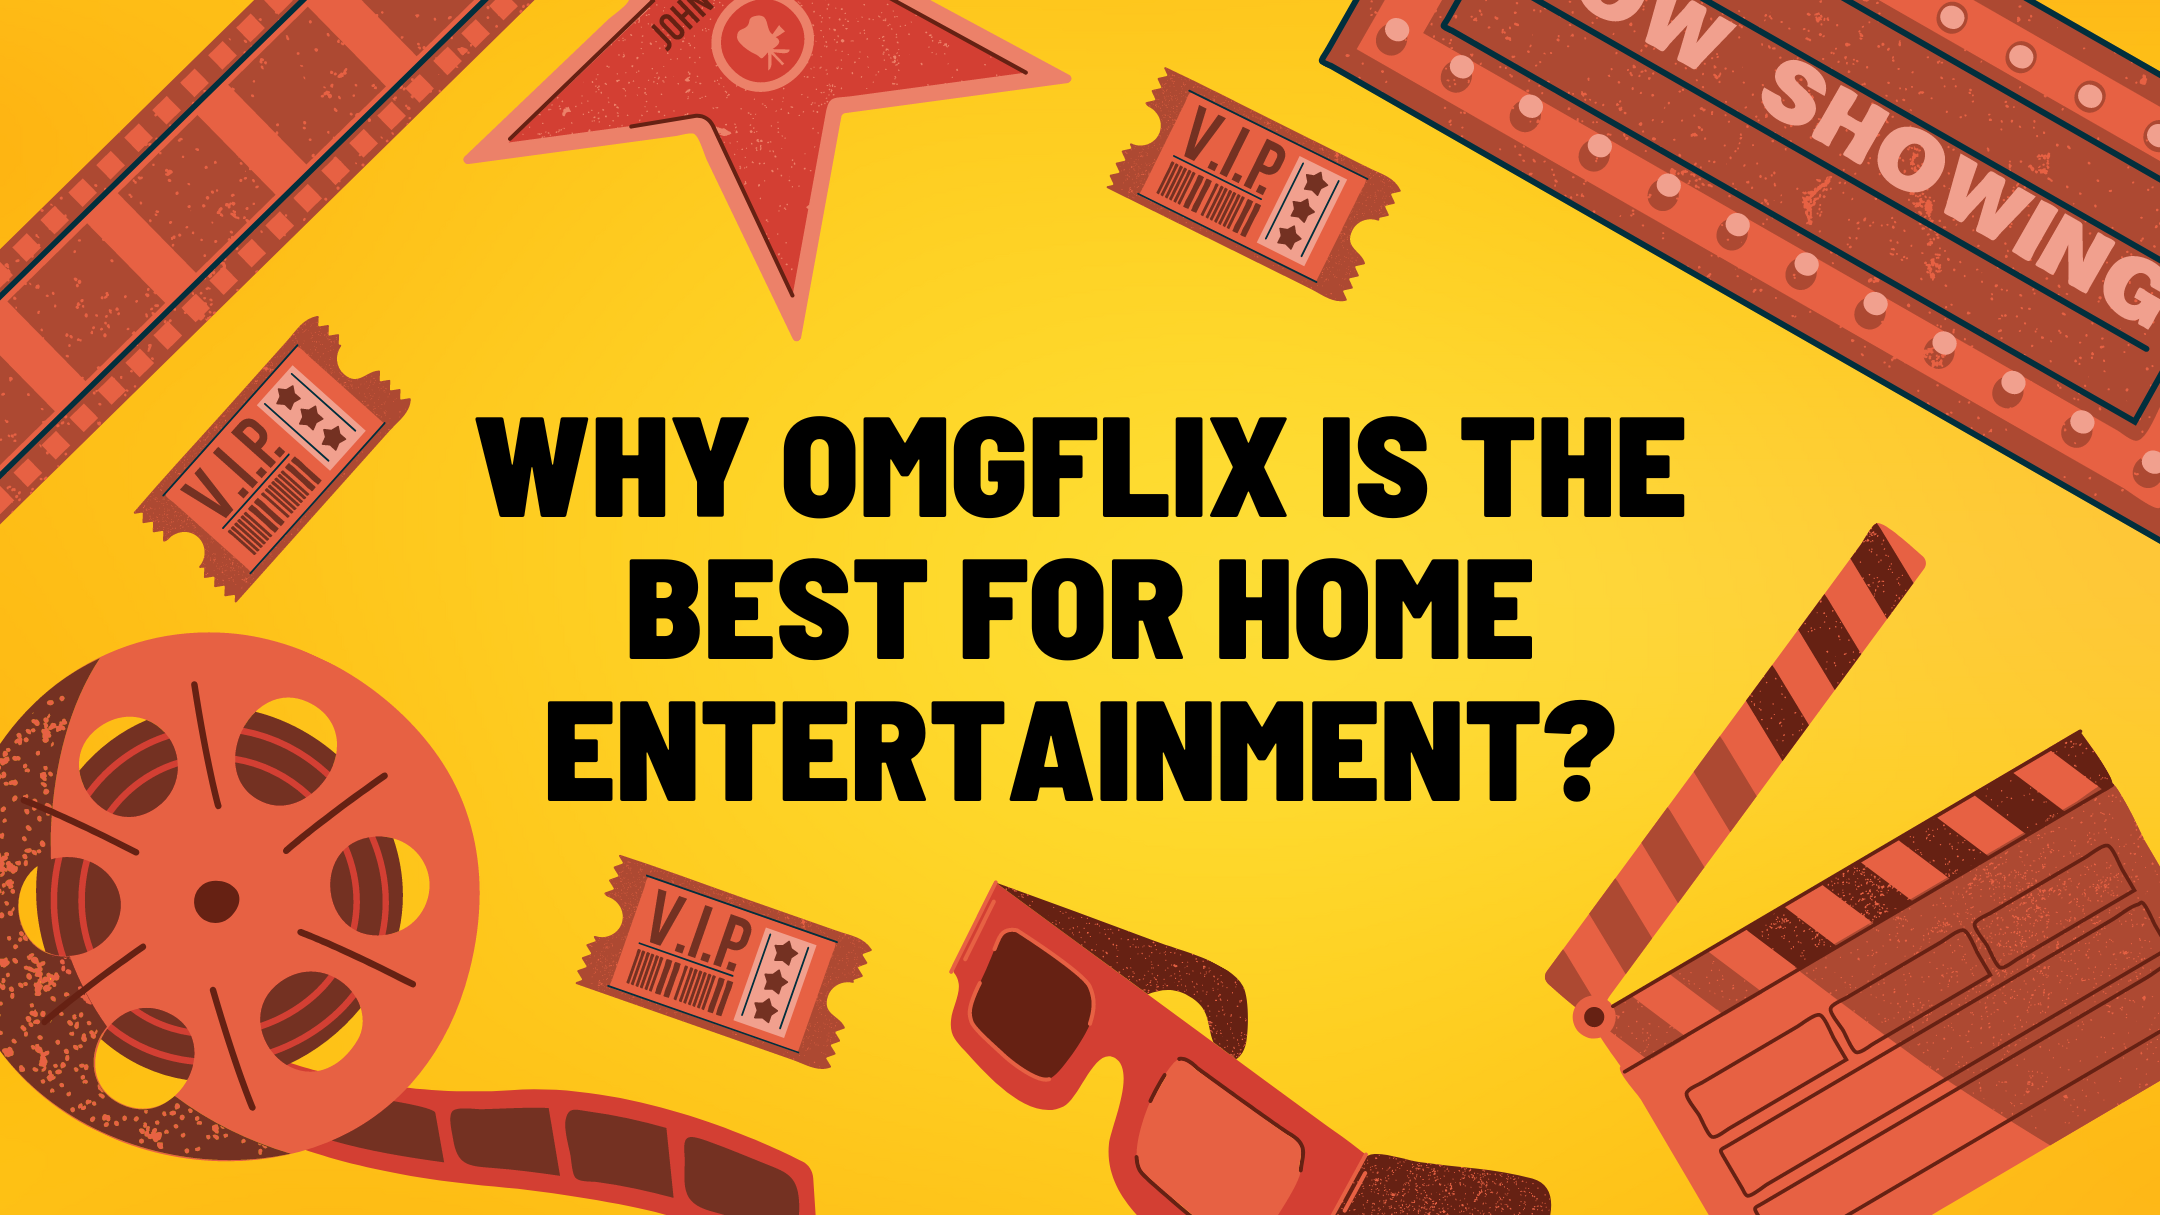 Why OMGflix is the Best For Home Entertainment